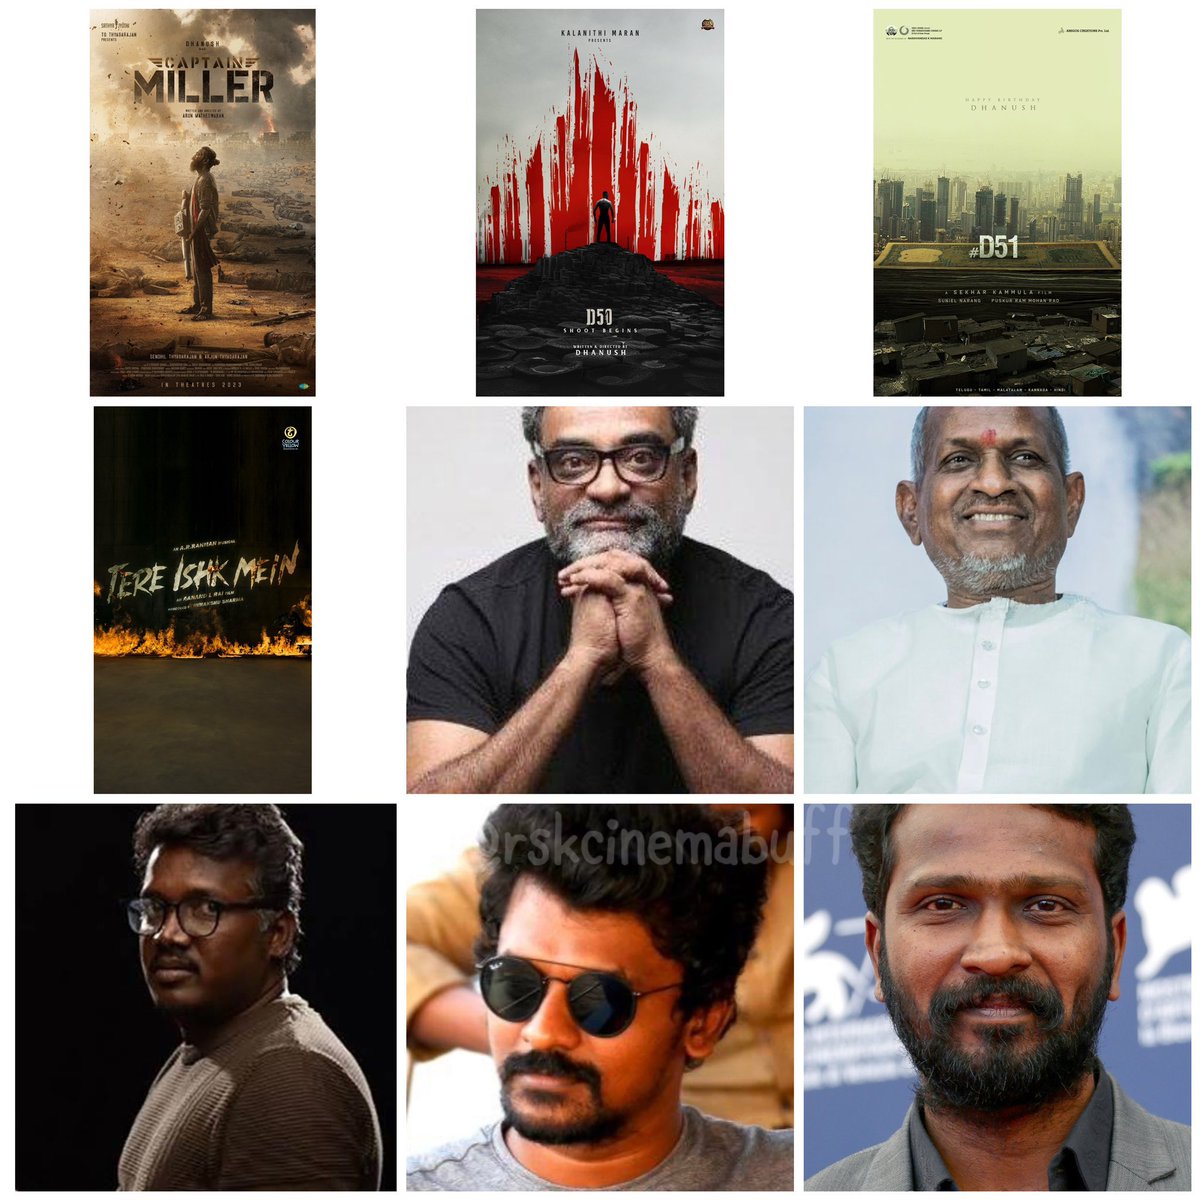 #Dhanush’s Upcoming line-ups🔥👍🎥

- #CaptainMiller on Dec🔥⏳ 
- #D50 act/directed by dhanush and shooting going on, title is #Raayan ✅⏳
- #D51 directed by #Sekarkammula , shooting this year end!✅⏳
- Next Hindi movie #TereIshqMein ✅⏳
- #Balki directional #Ilayaraja biopic